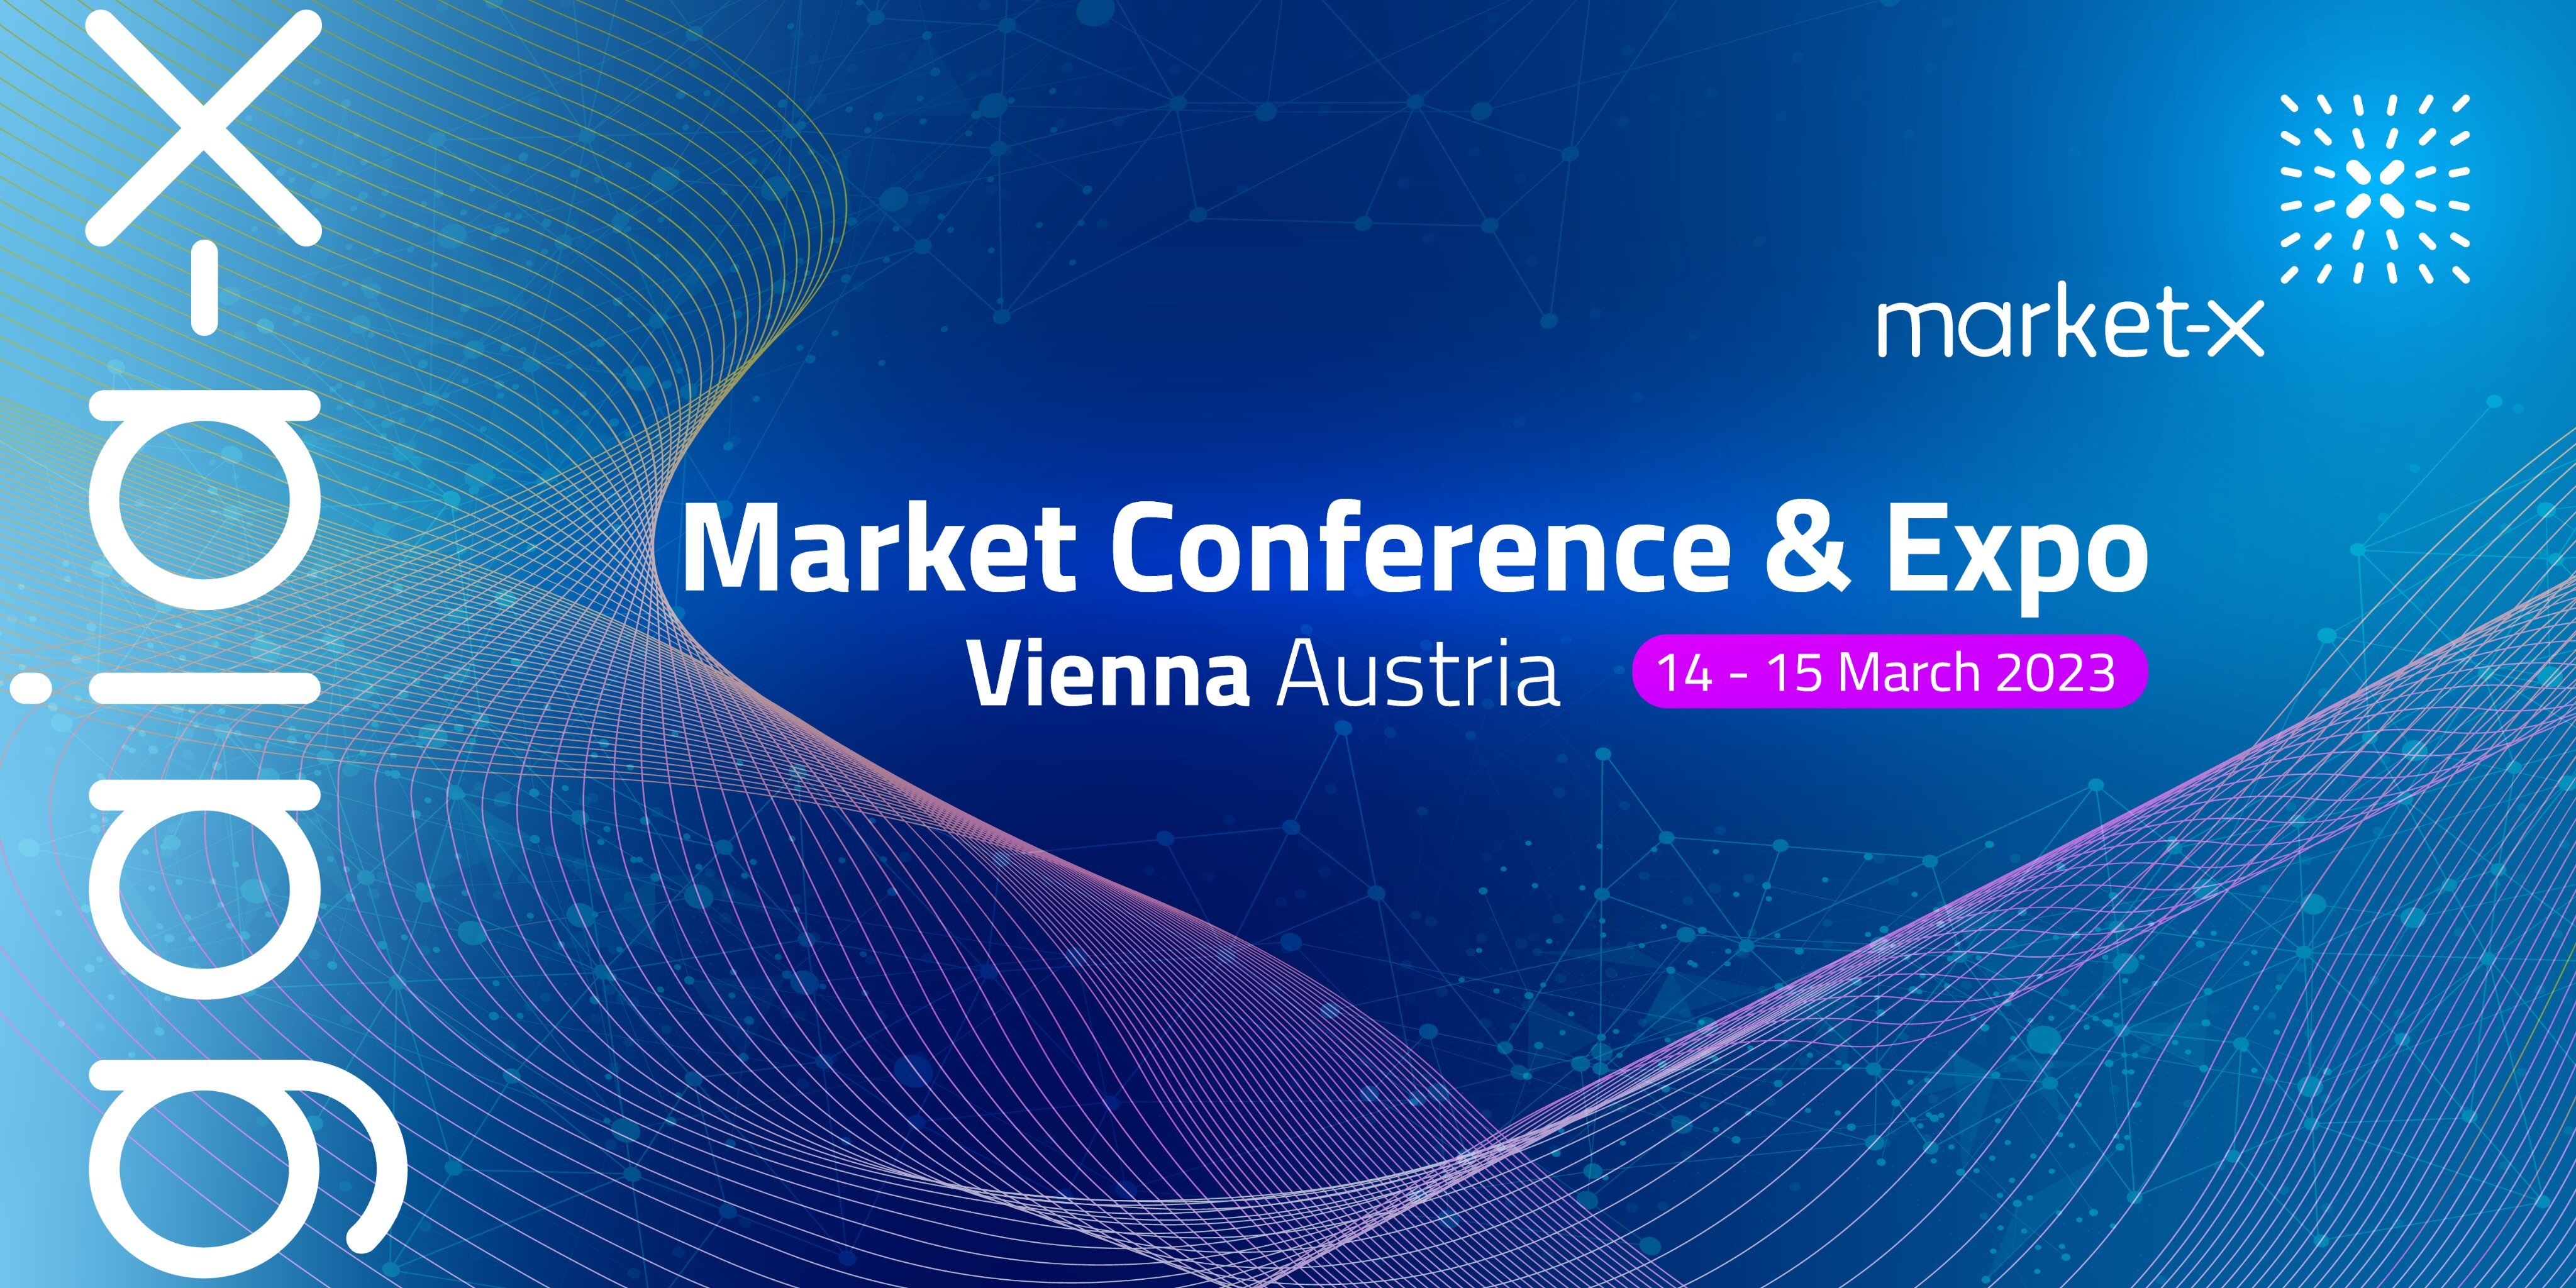 BEIA at the Industry 4.0 International Business Meetings 2023 and Market-X Conference & Expo